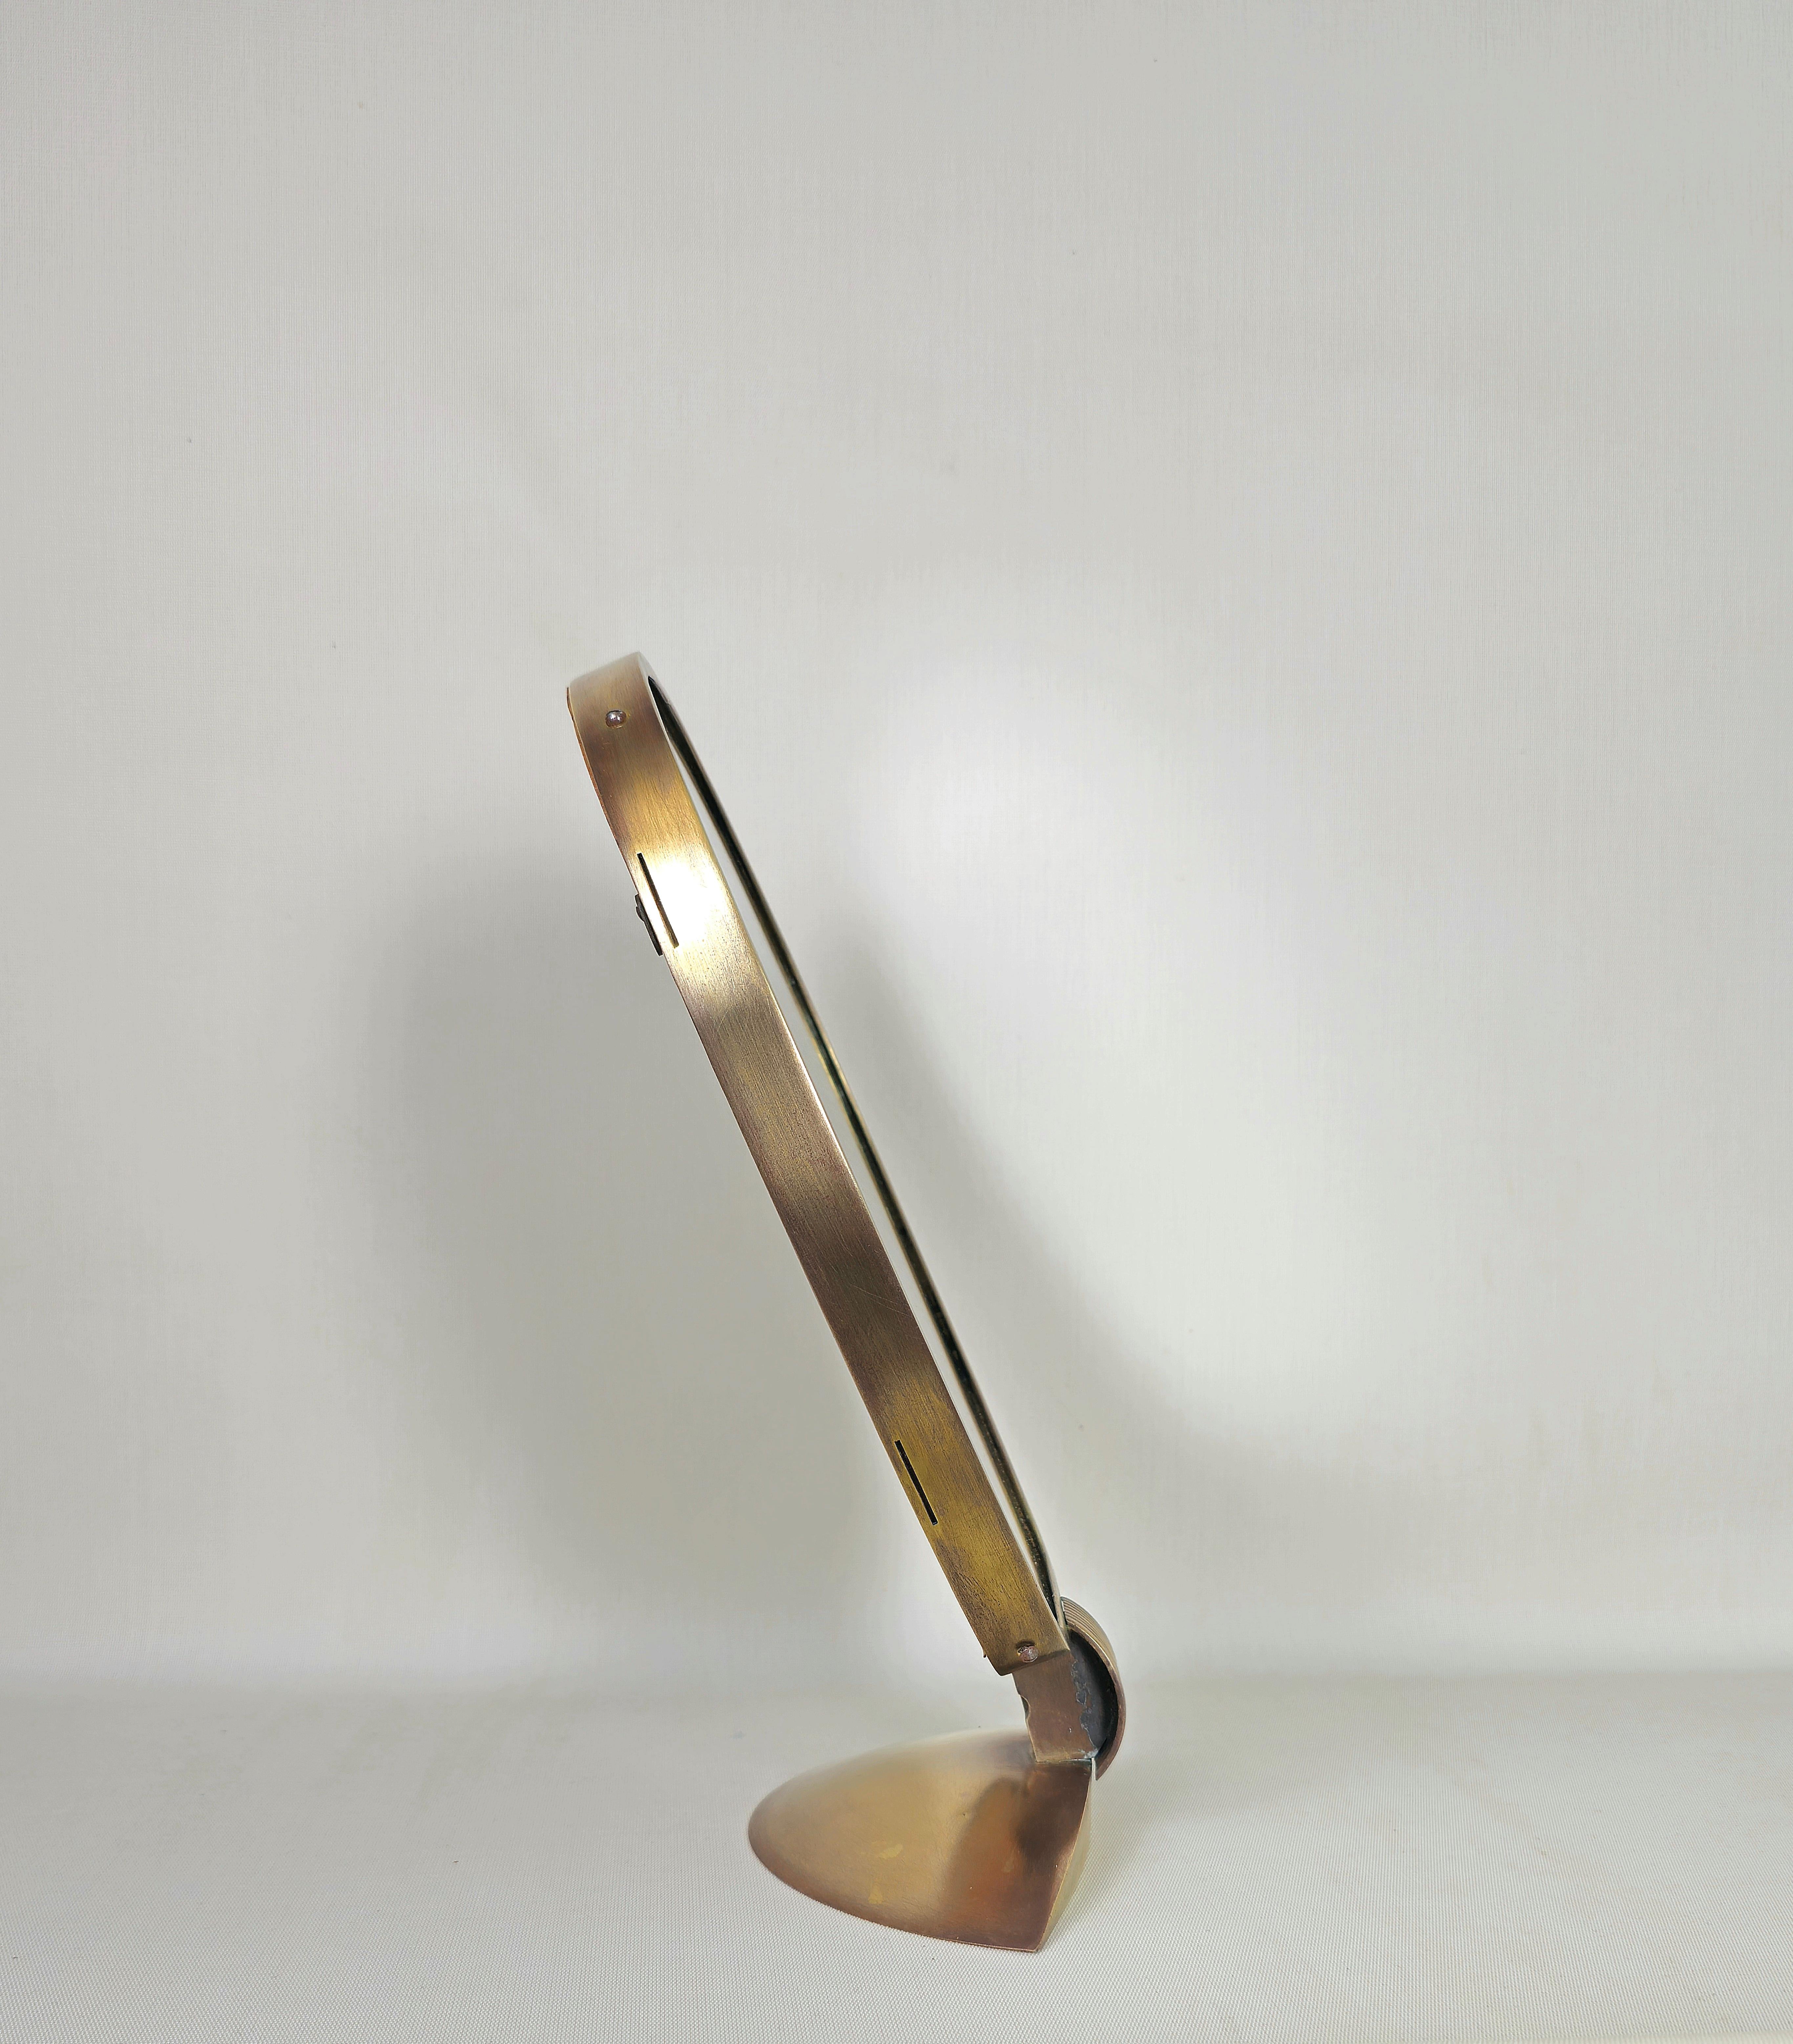 20th Century Table Mirror Brass Brushed Midcentury Modern Italian Design 1950s For Sale